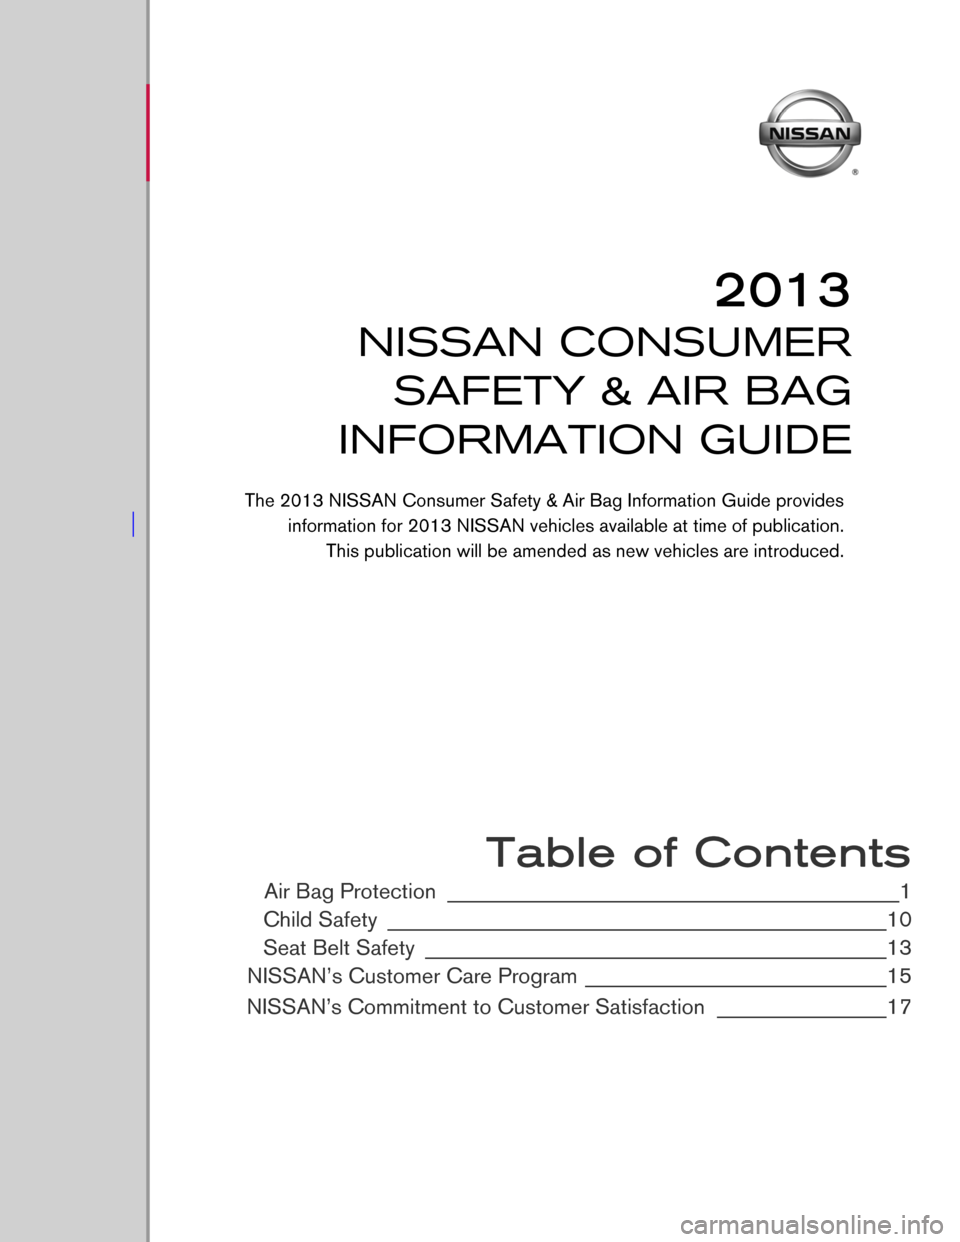 NISSAN VERSA SEDAN 2013 2.G Consumer Safety Air Bag Information Guide  
 
 
 
 
 
 
 
 
 
 
 
 
 
 
 
 
 
 
 
 
 
 
 Table of Contents
Air Bag Protection ________________________________________________1
Child Safety
 ____________________________________________________